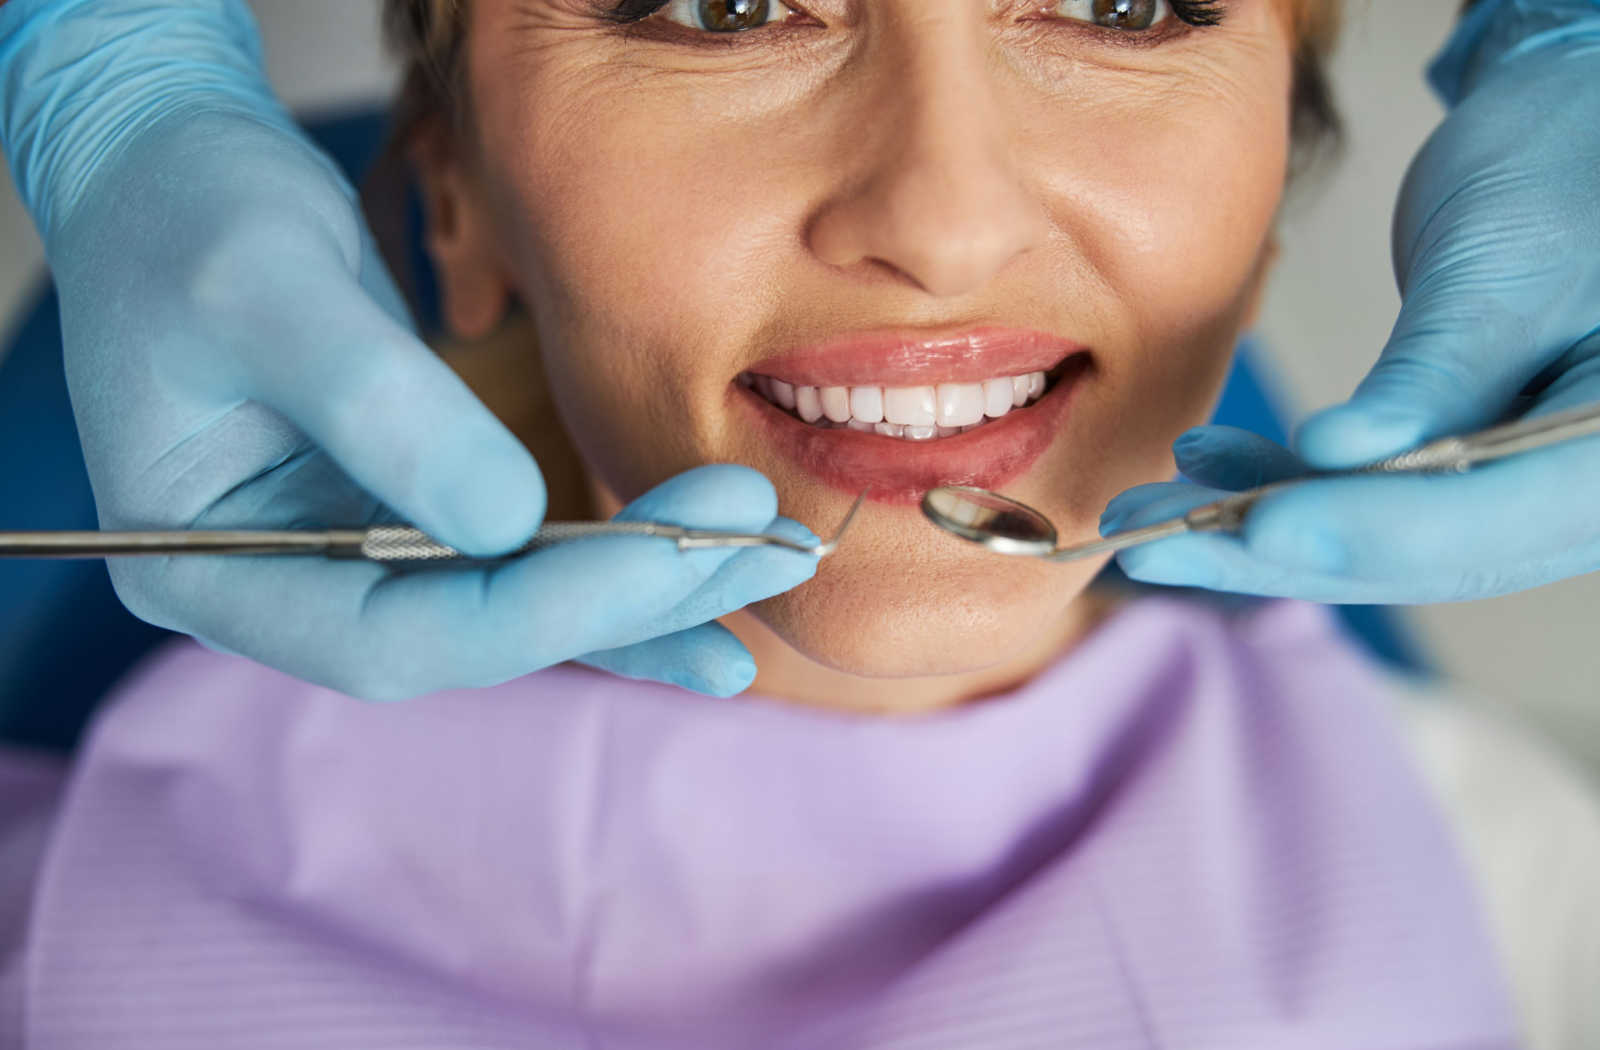 Revitalize Your Smile: A Guide to Different Dental Treatments